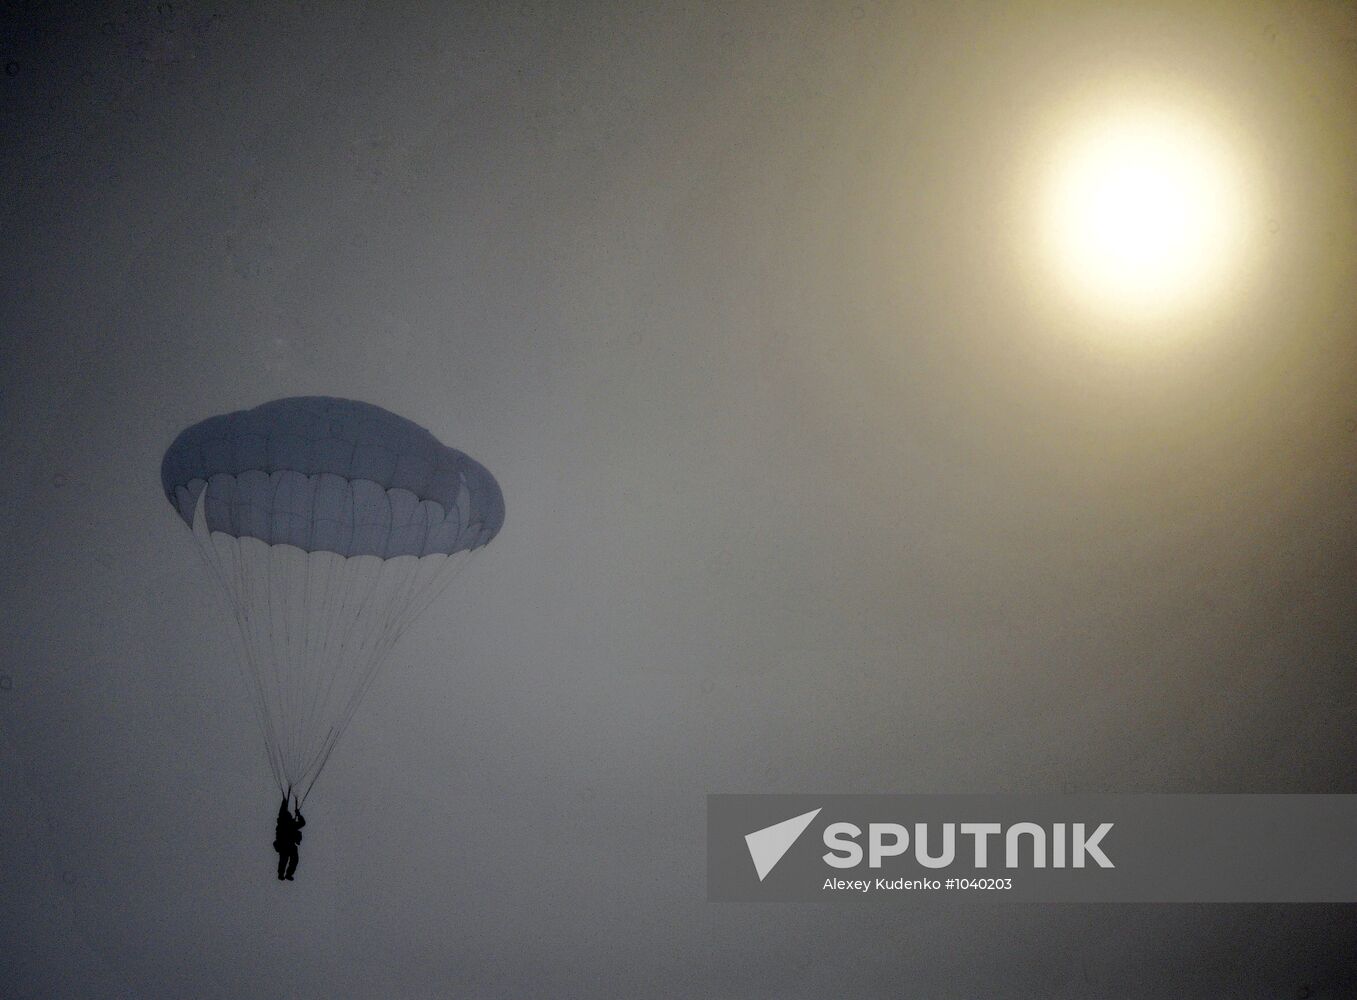 Exercises of 106th guards division paratroopers in Tula region